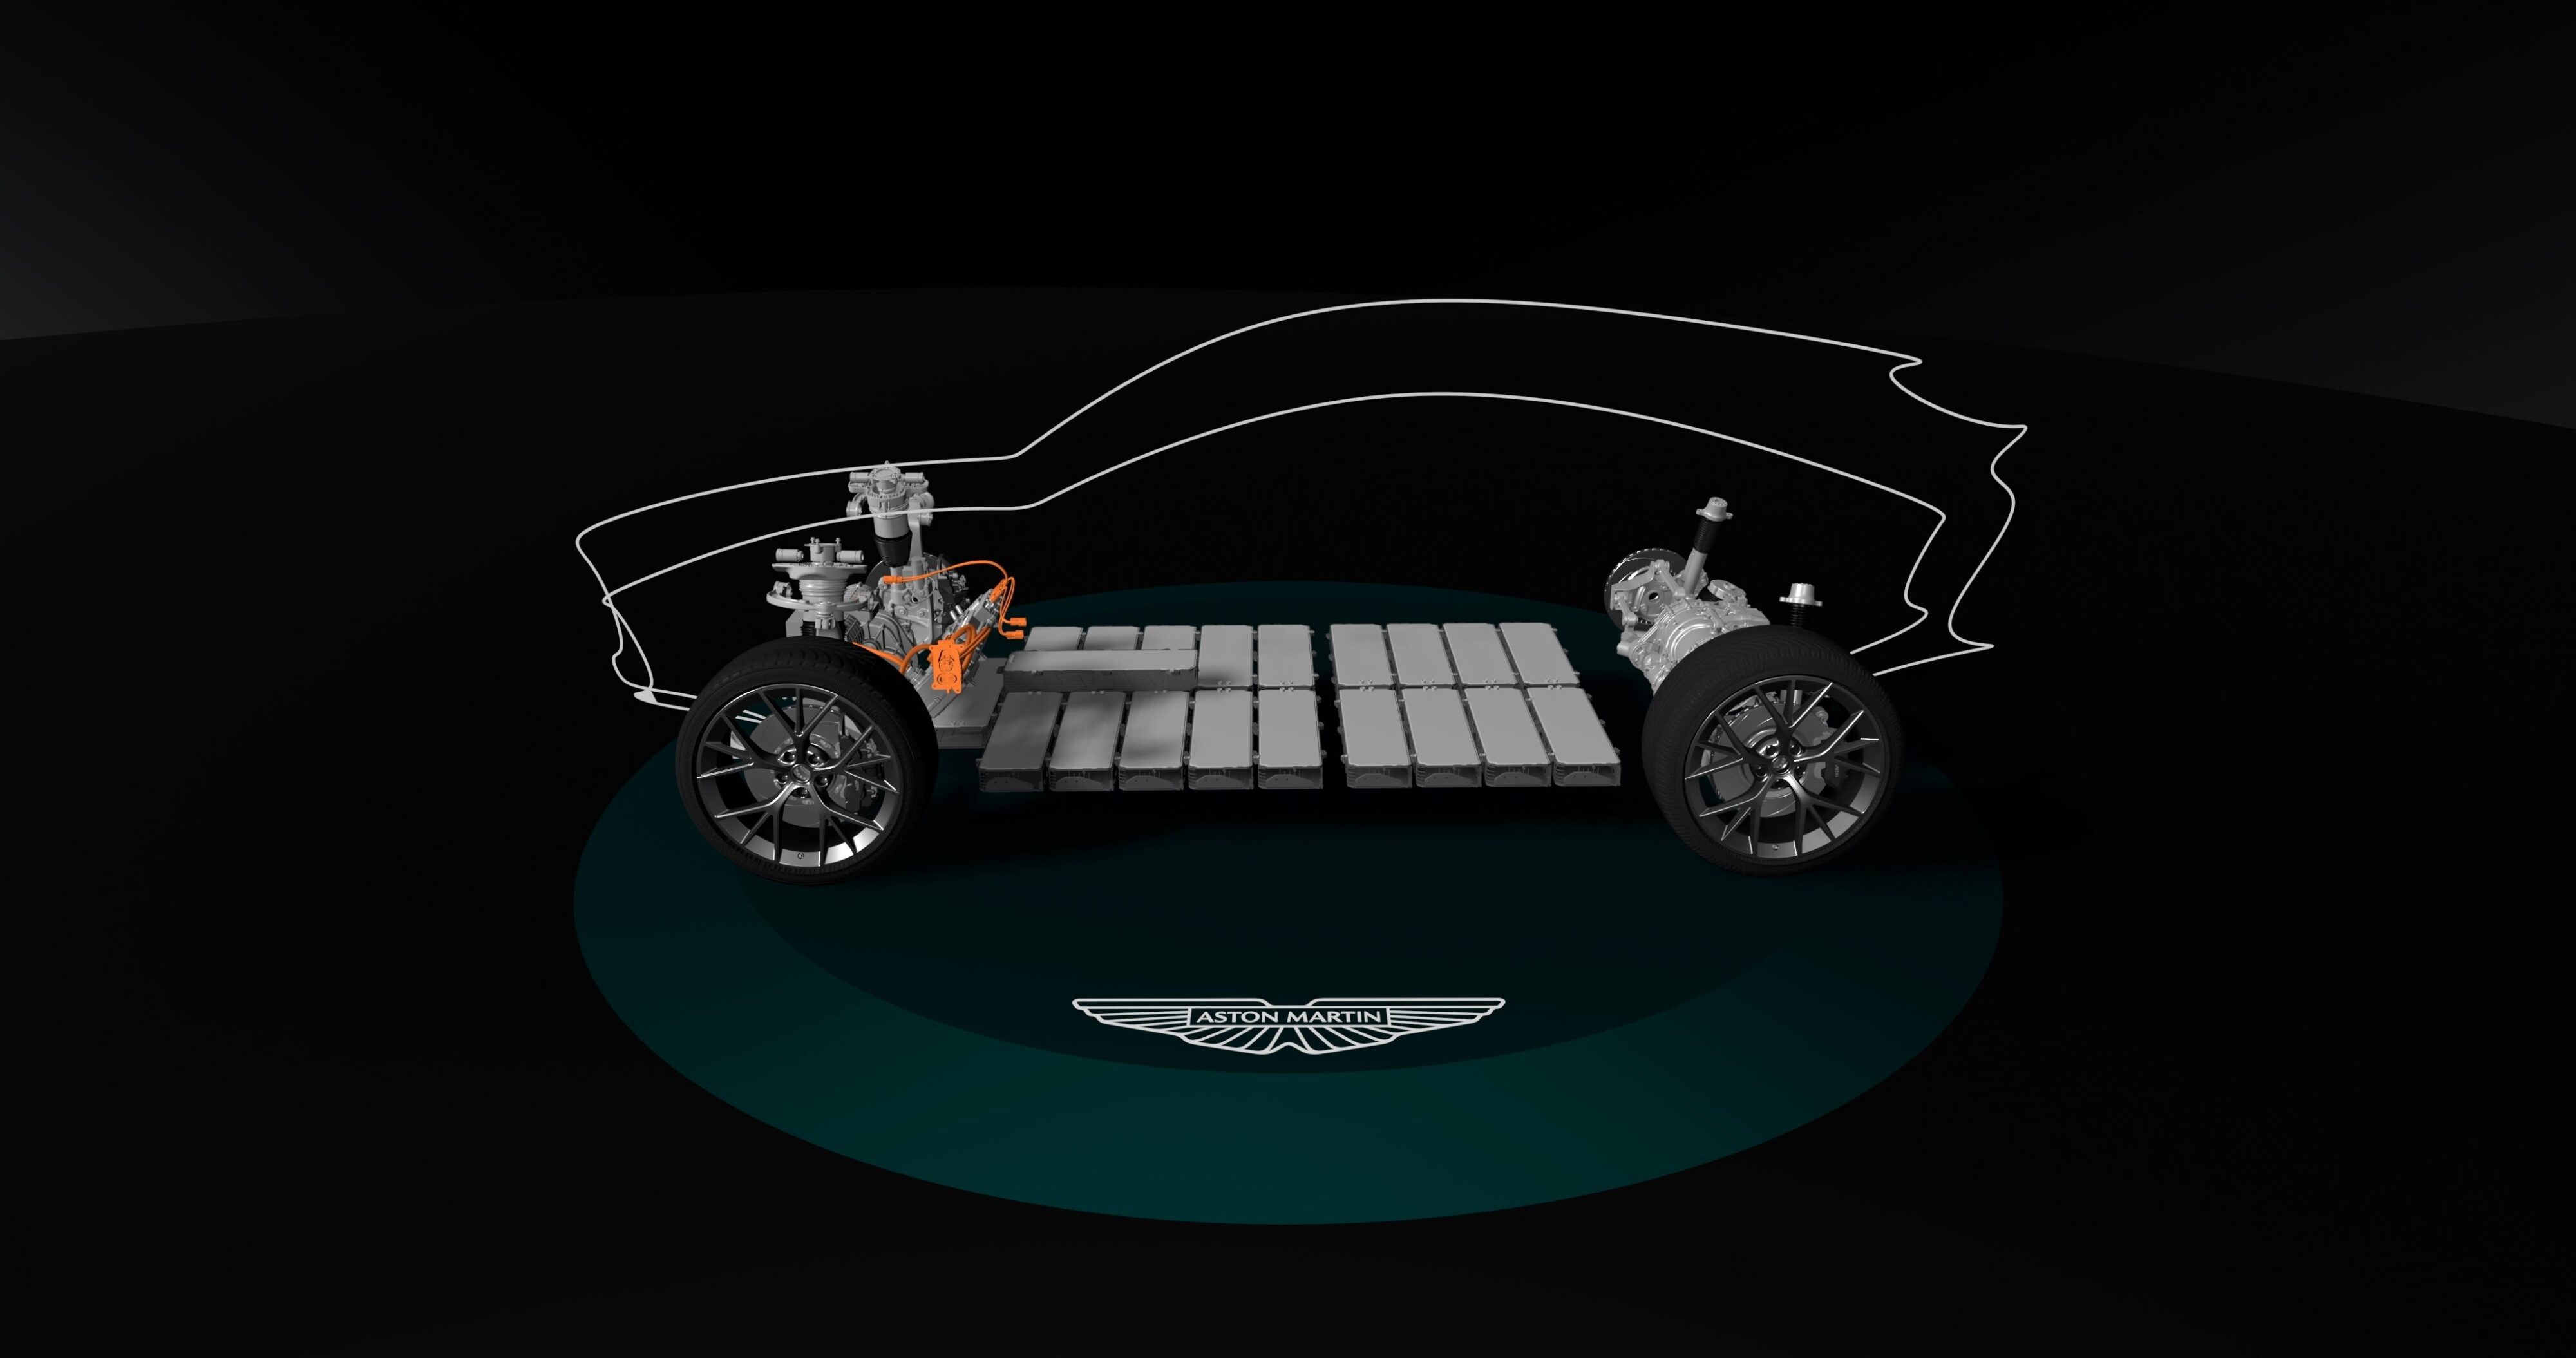 An image of an Aston Martin Electric Vehicle prototype.